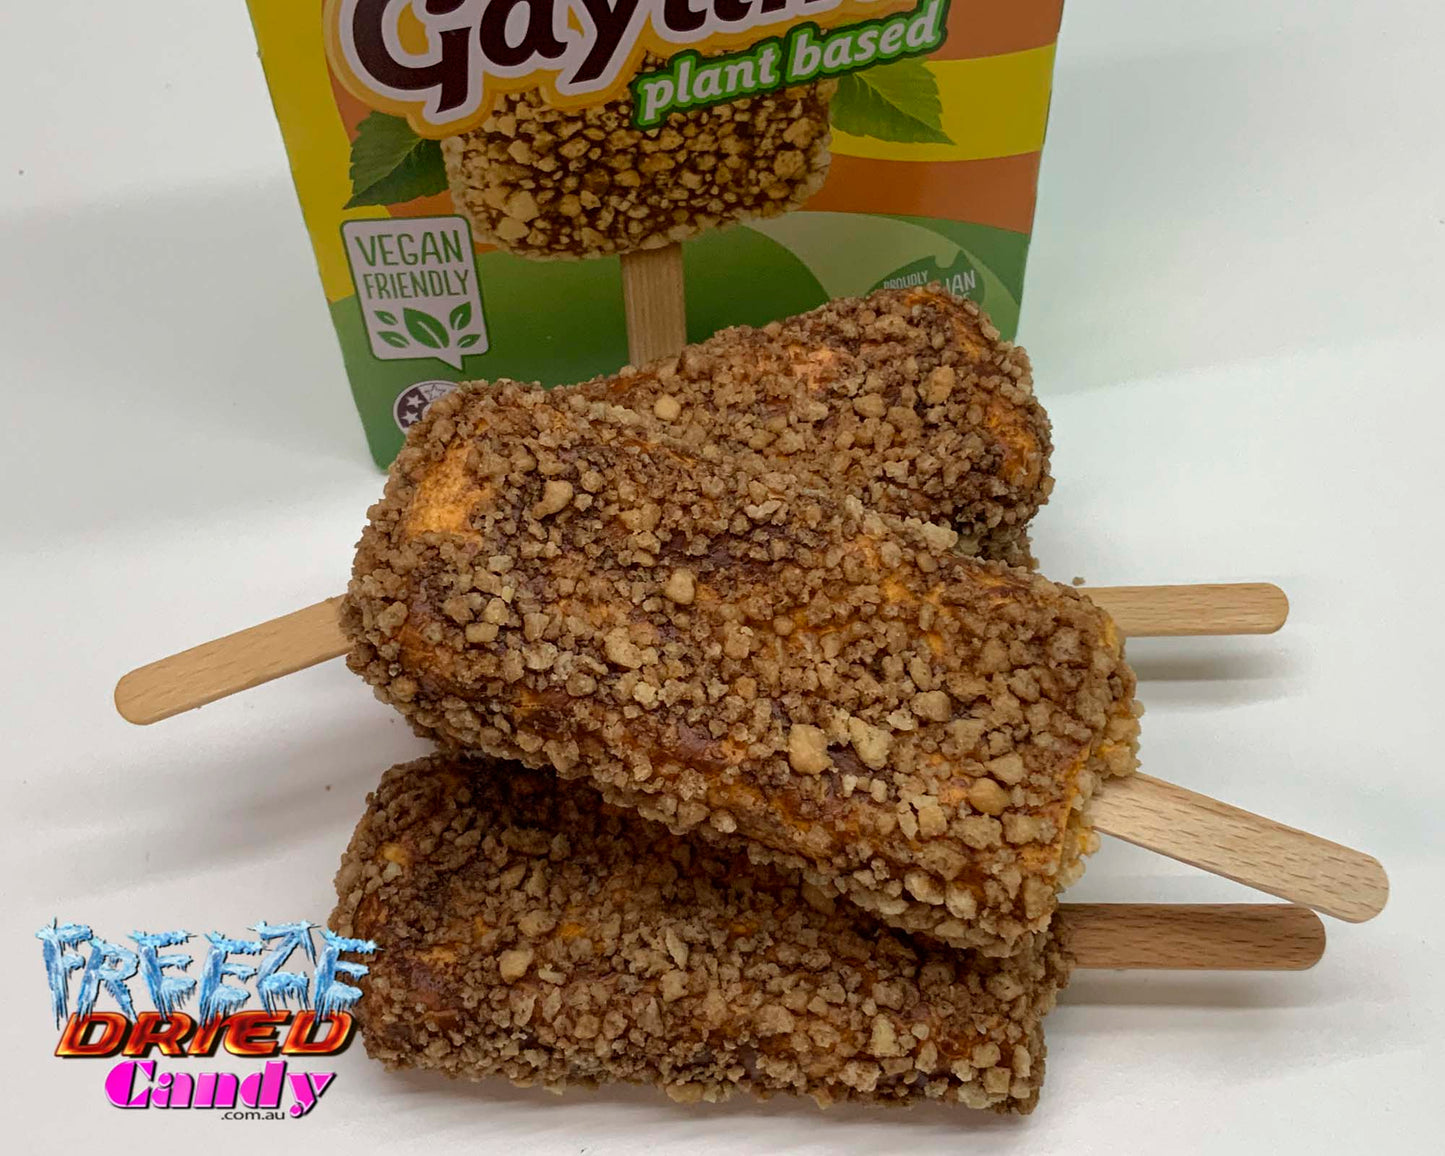 Freeze Dried Ice Cream - Golden Gaytime - Plant Based -  Freeze Dried Candy Lollies | Australia